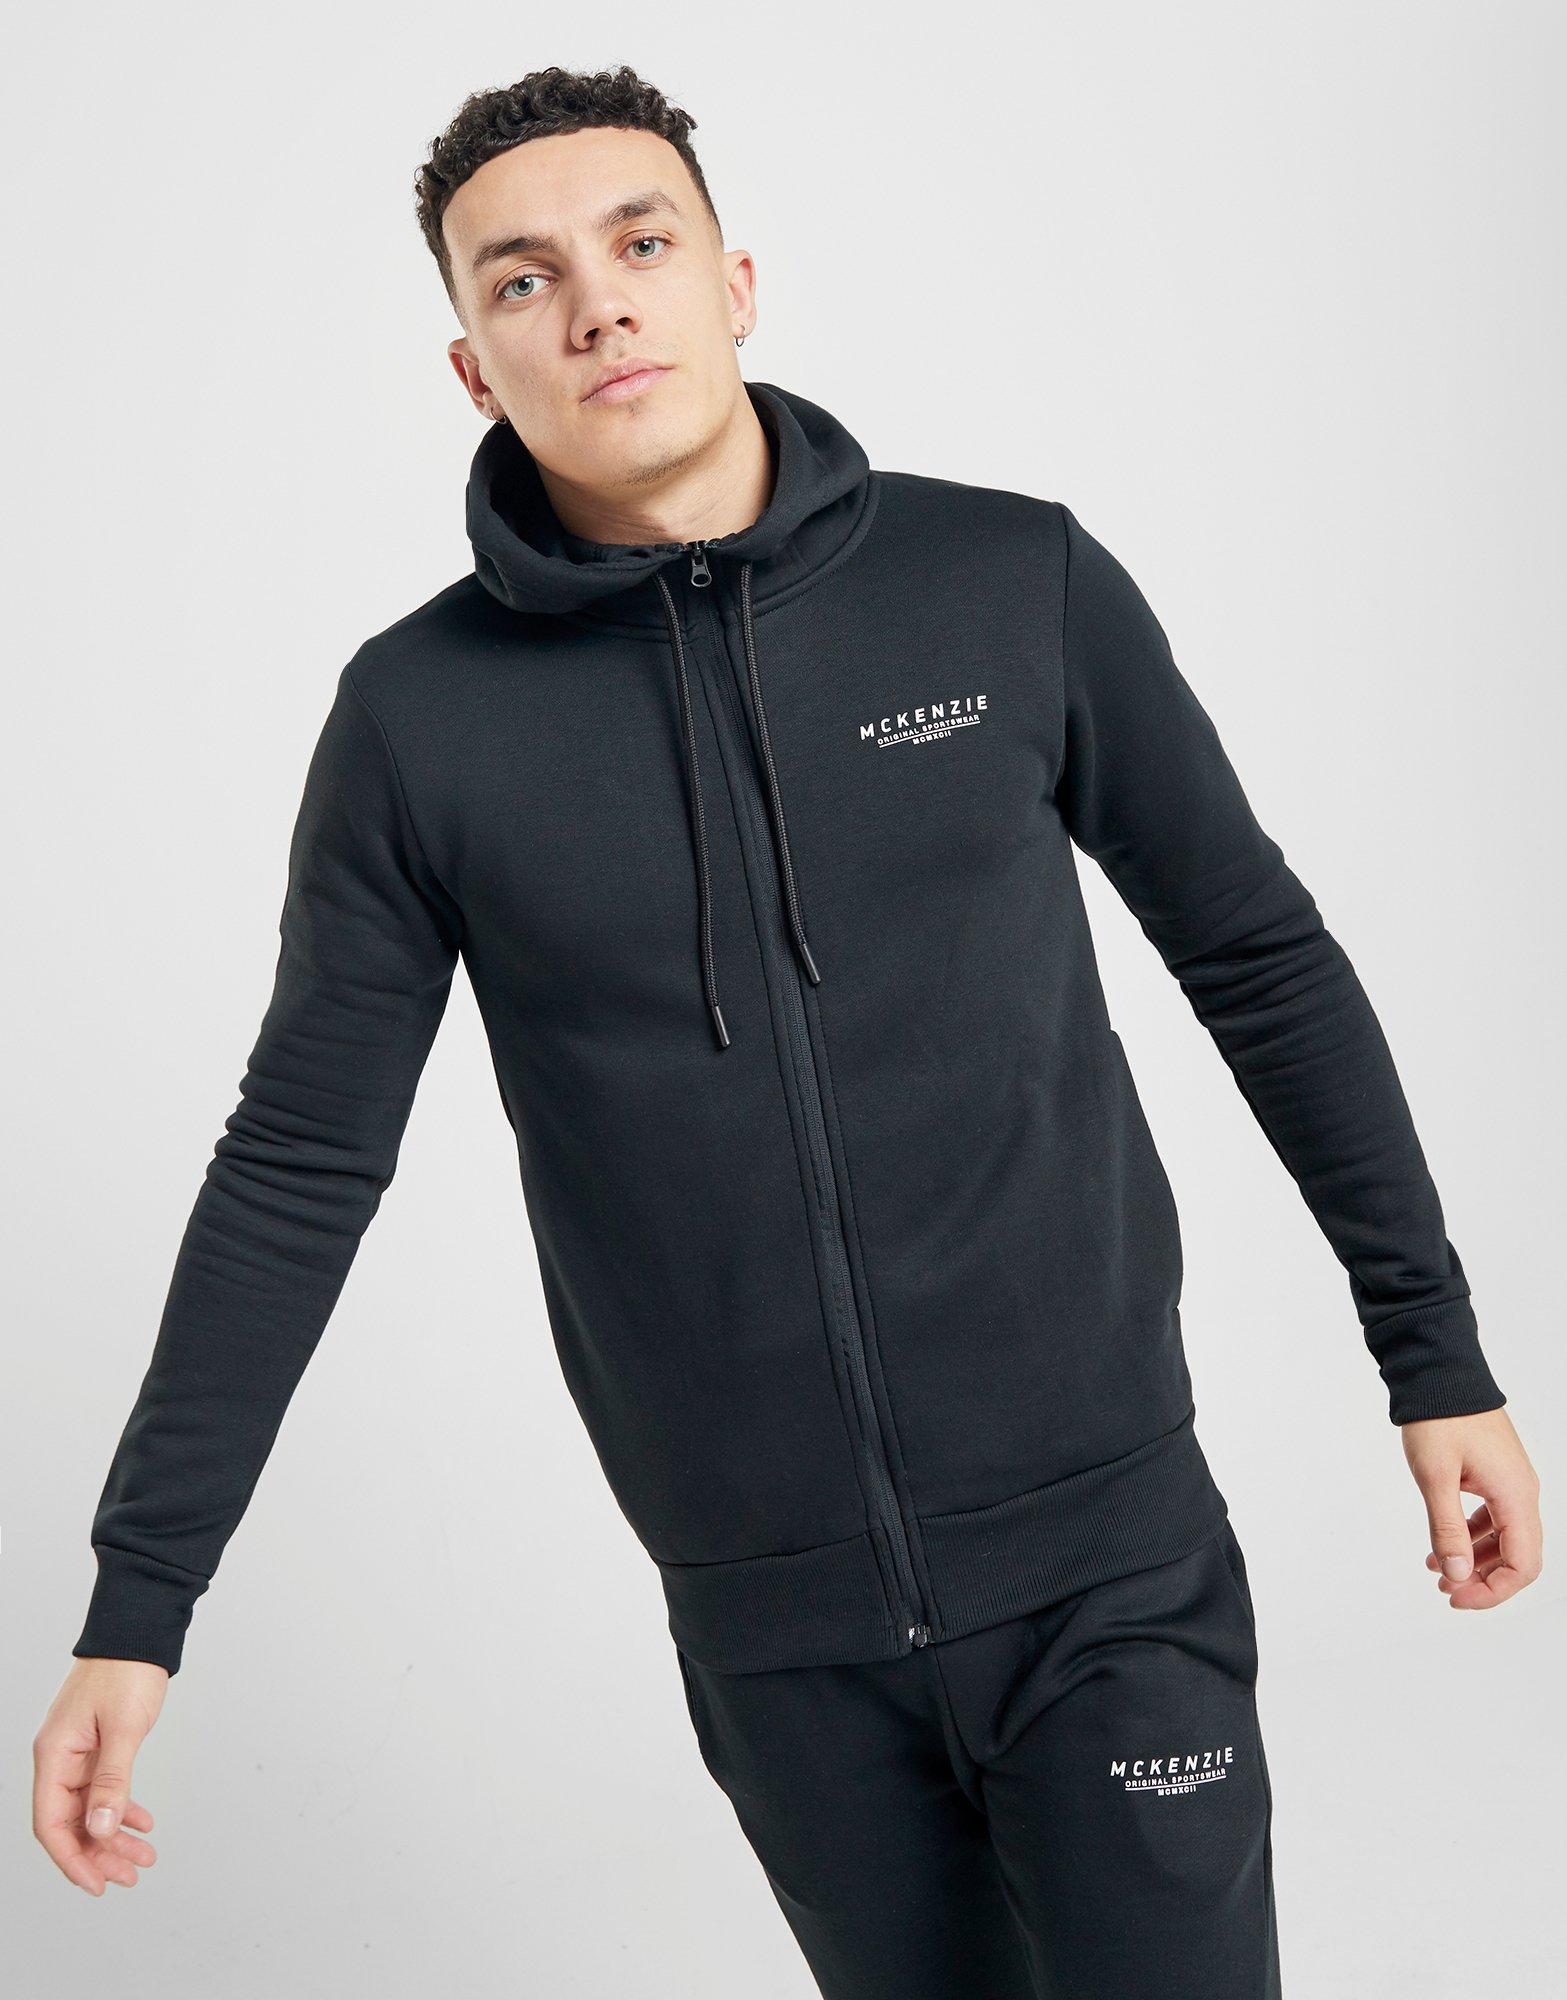 New McKenzie Men’s Essential Tracksuit from JD Outlet 